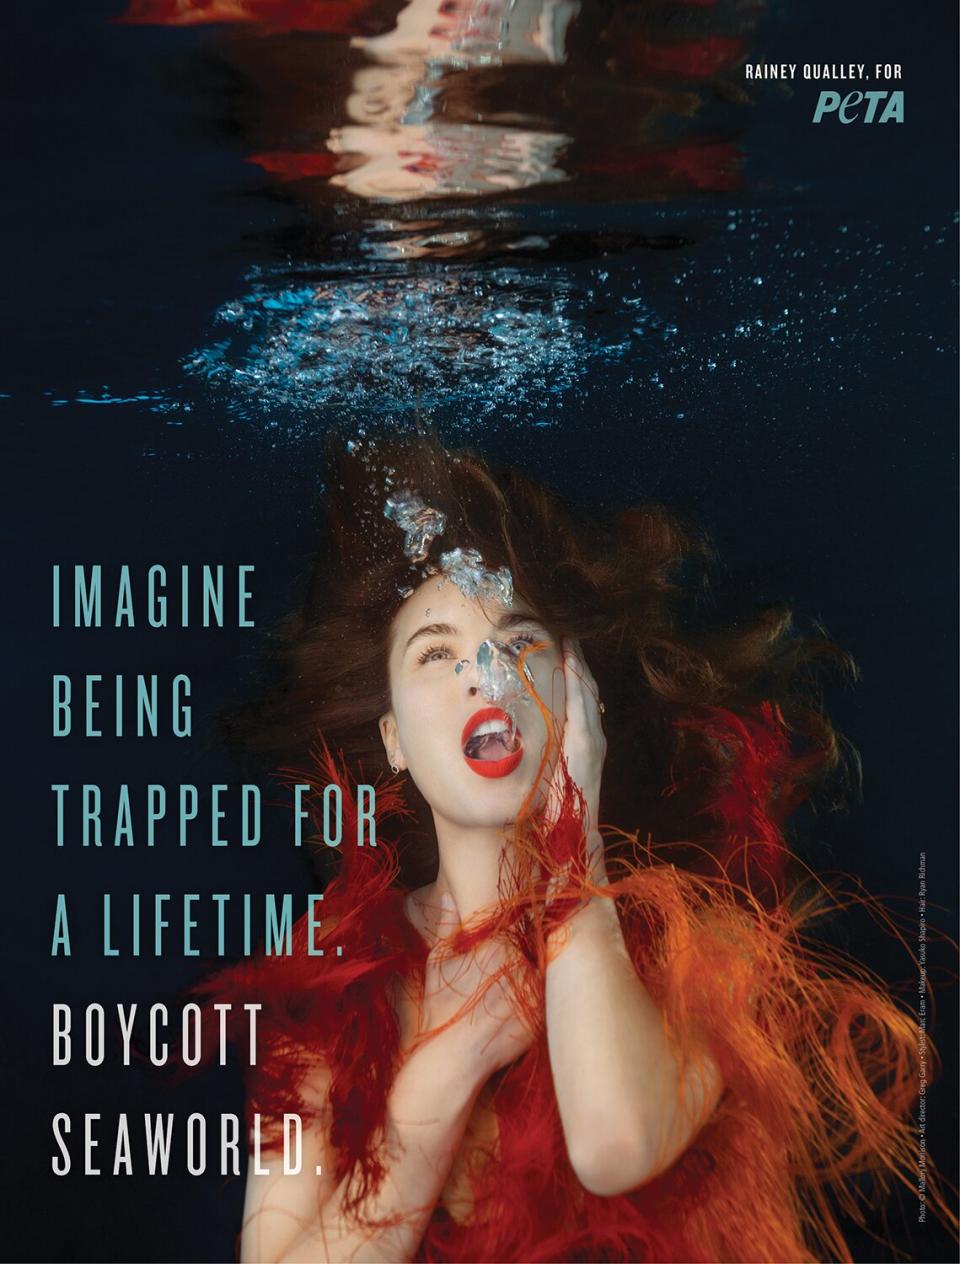 Rainey Qualley Speaks Out Against SeaWorld in New Campaign: 'If You Love Animals, Don't Go to Seaworld'